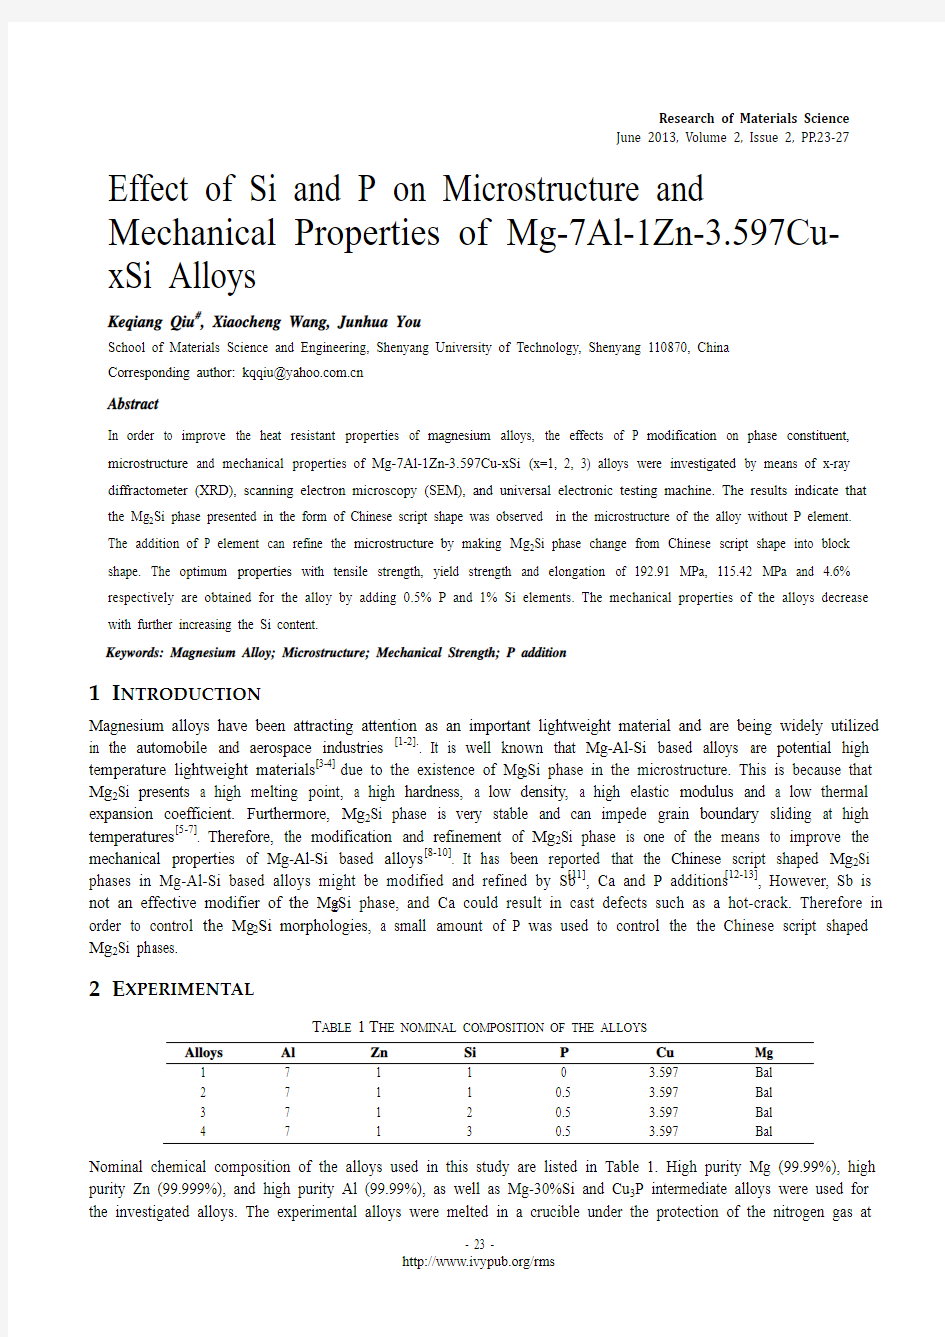 Effect of Si and P on Microstructure and Mechanical Properties of Mg-7Al-1Zn-3.597Cu-xSi Alloys